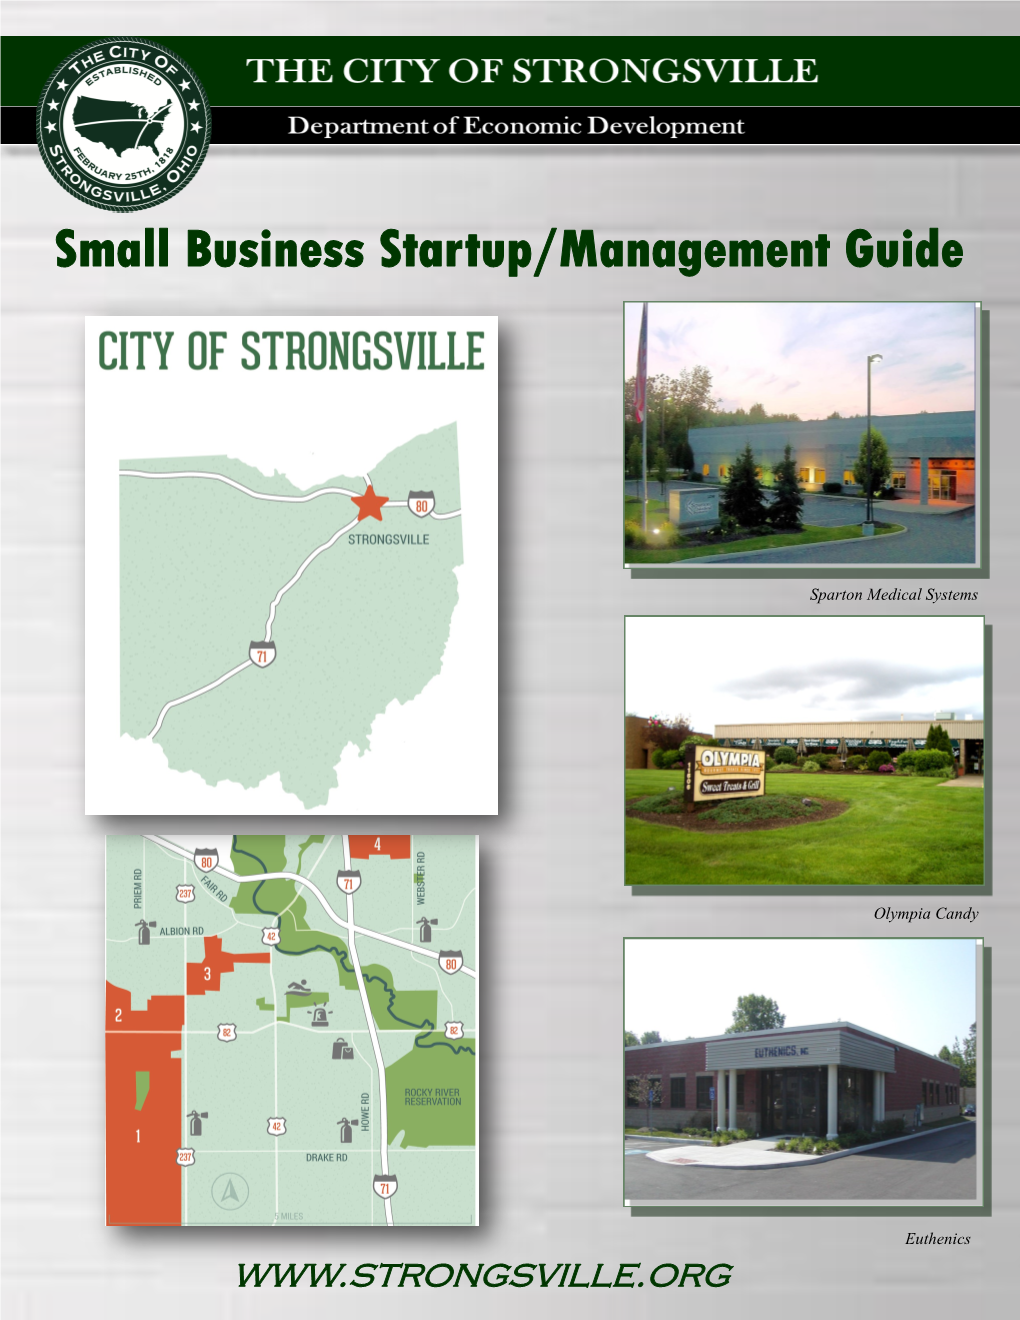 Small Business Startup/Management Guide